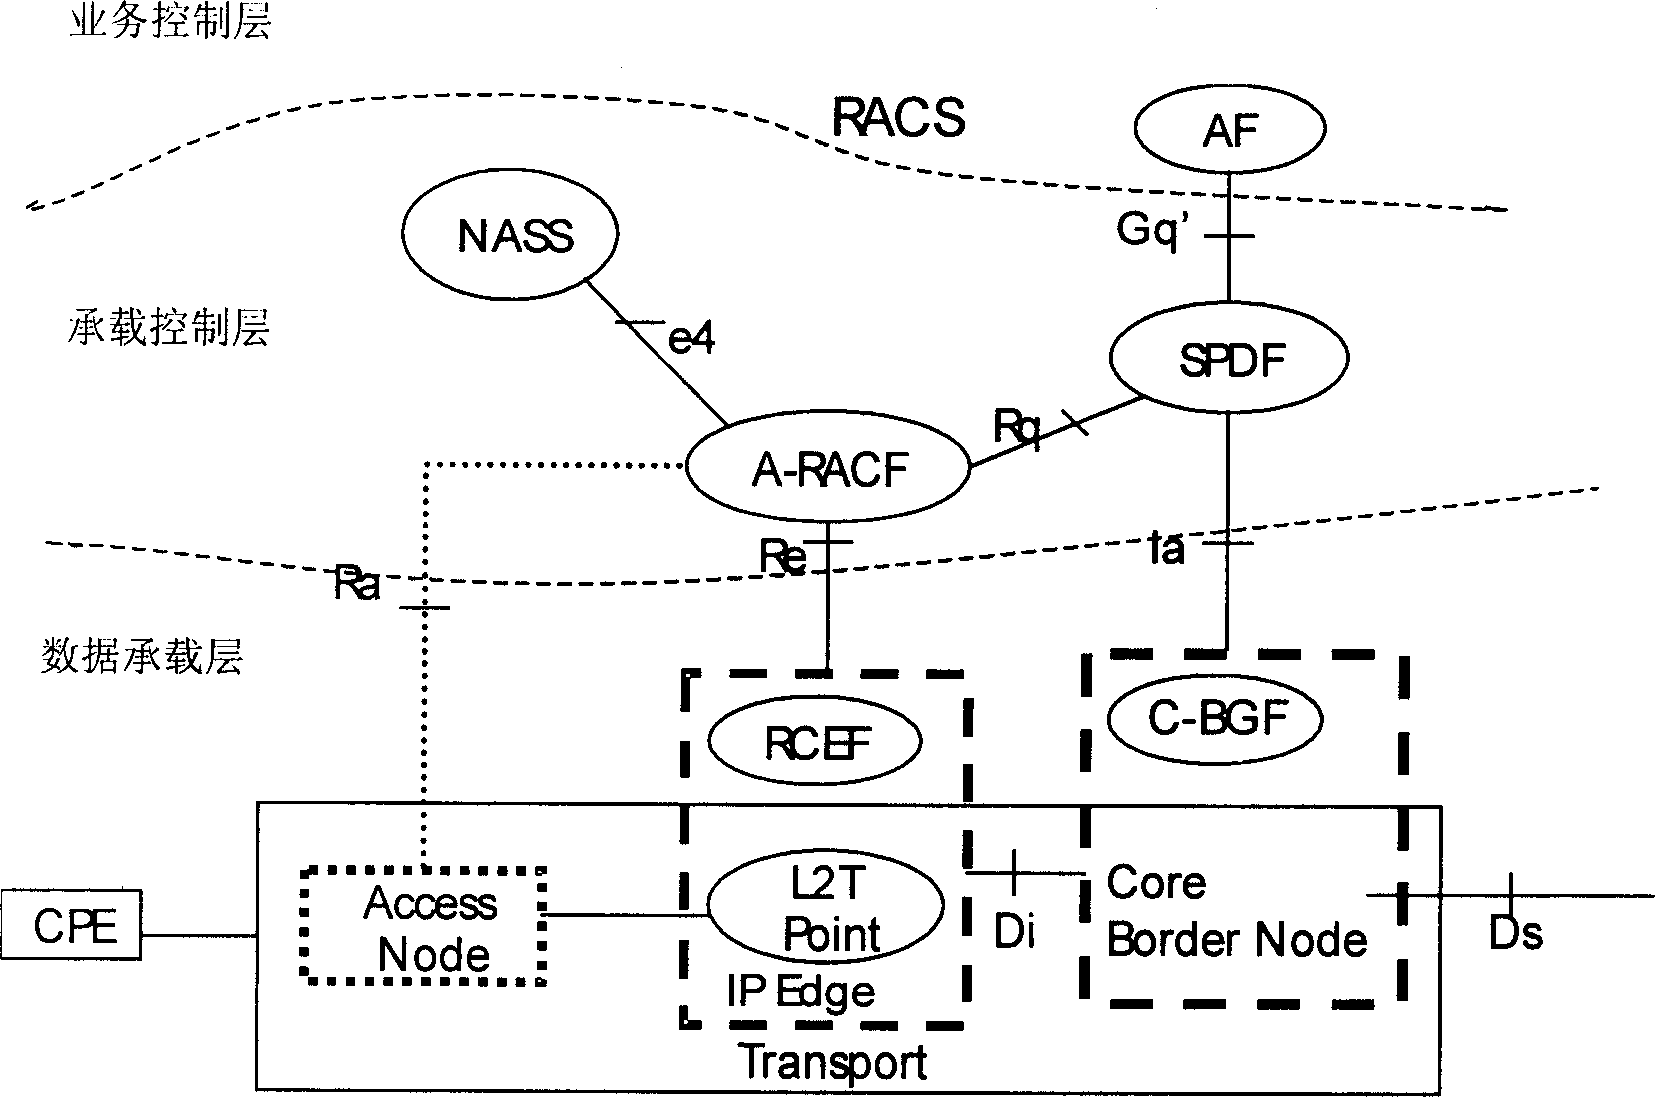 Method of implementing a set of specific stream QoS control